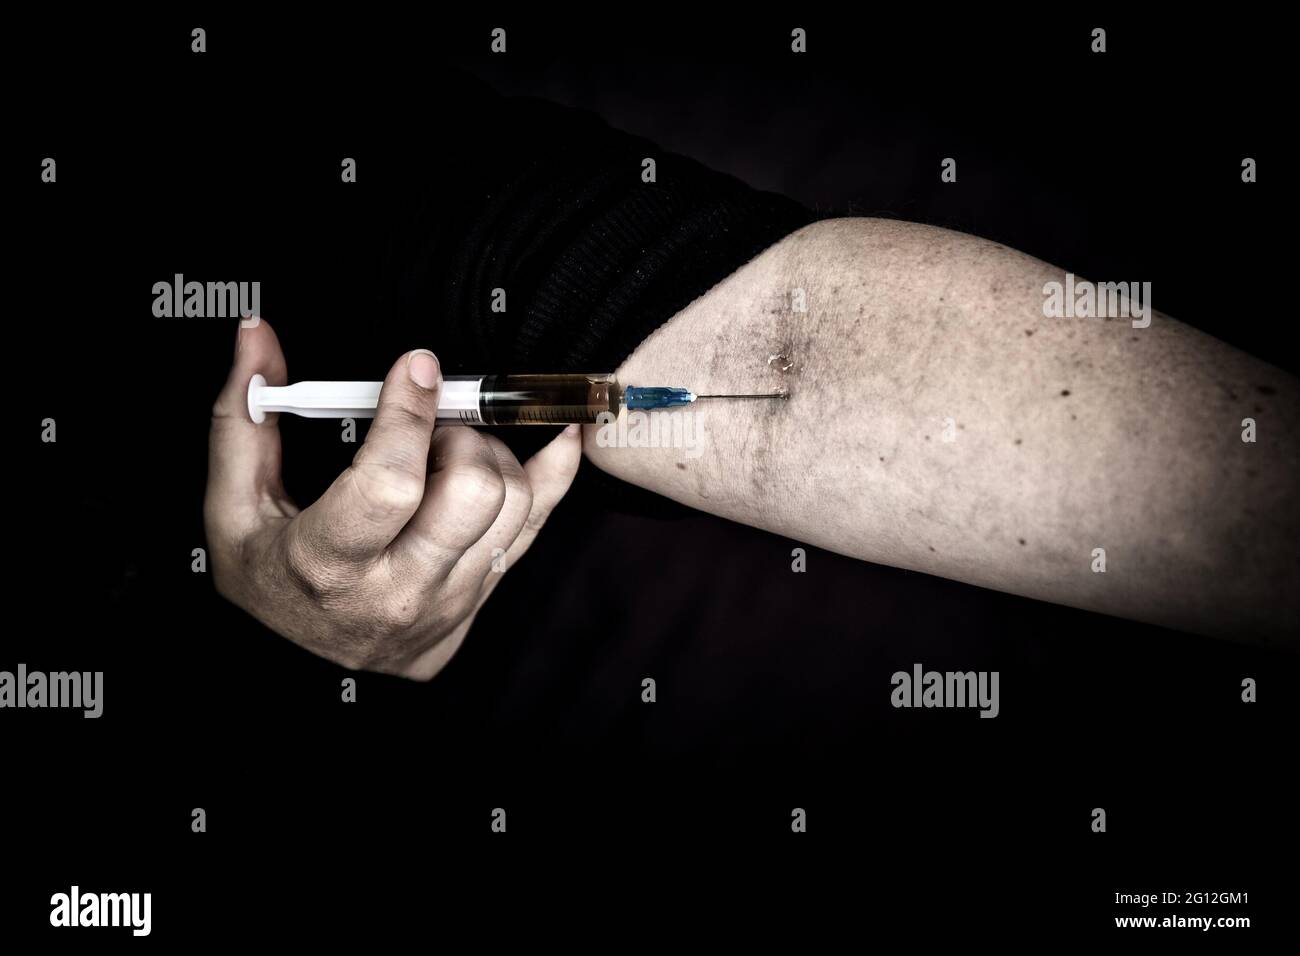 heroin addiction Junky shooting up Horse with syringe on dark background, Drugs,Junk,teen,addict concept portrait. Stock Photo